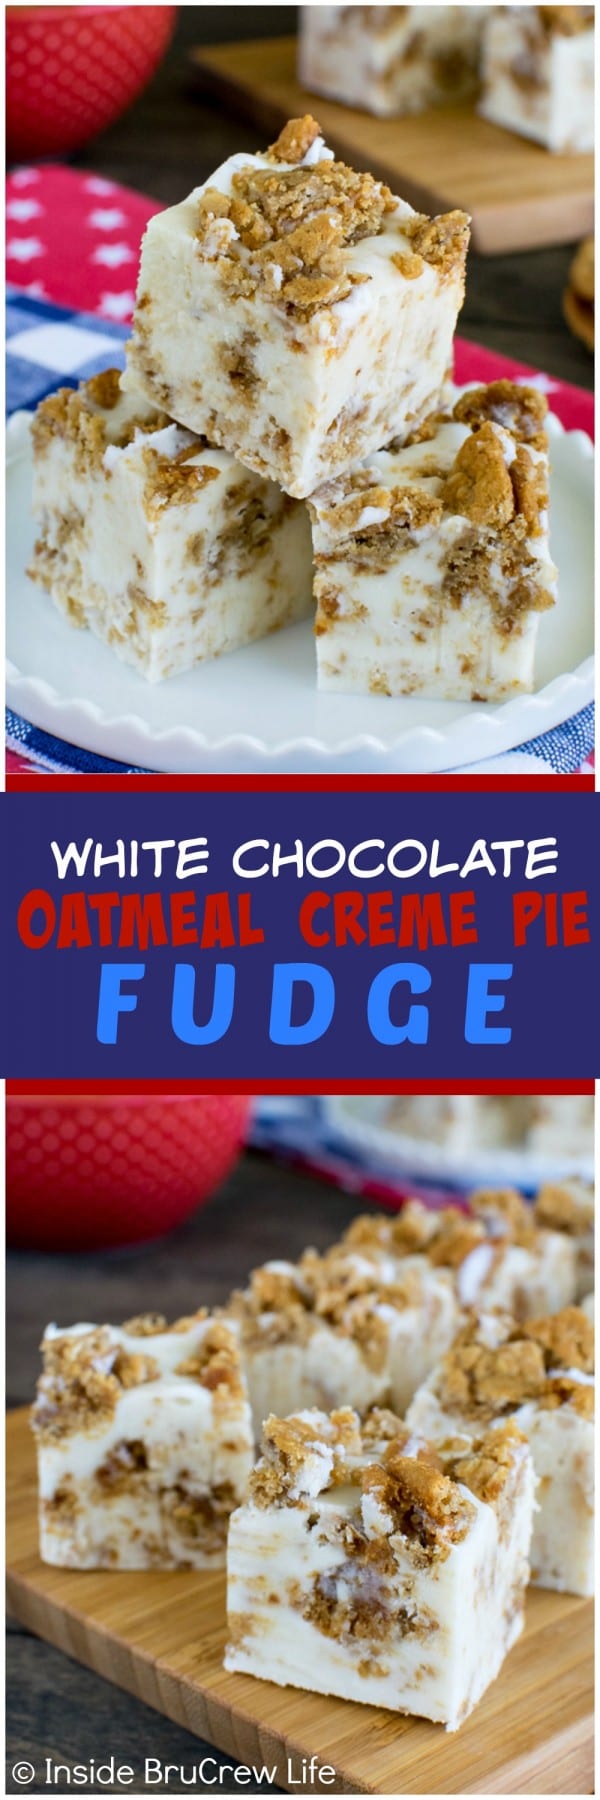 White Chocolate Oatmeal Creme Pie Fudge - this easy 4 ingredient fudge is loaded with soft oatmeal cookies and marshmallow. Awesome no bake dessert recipe!